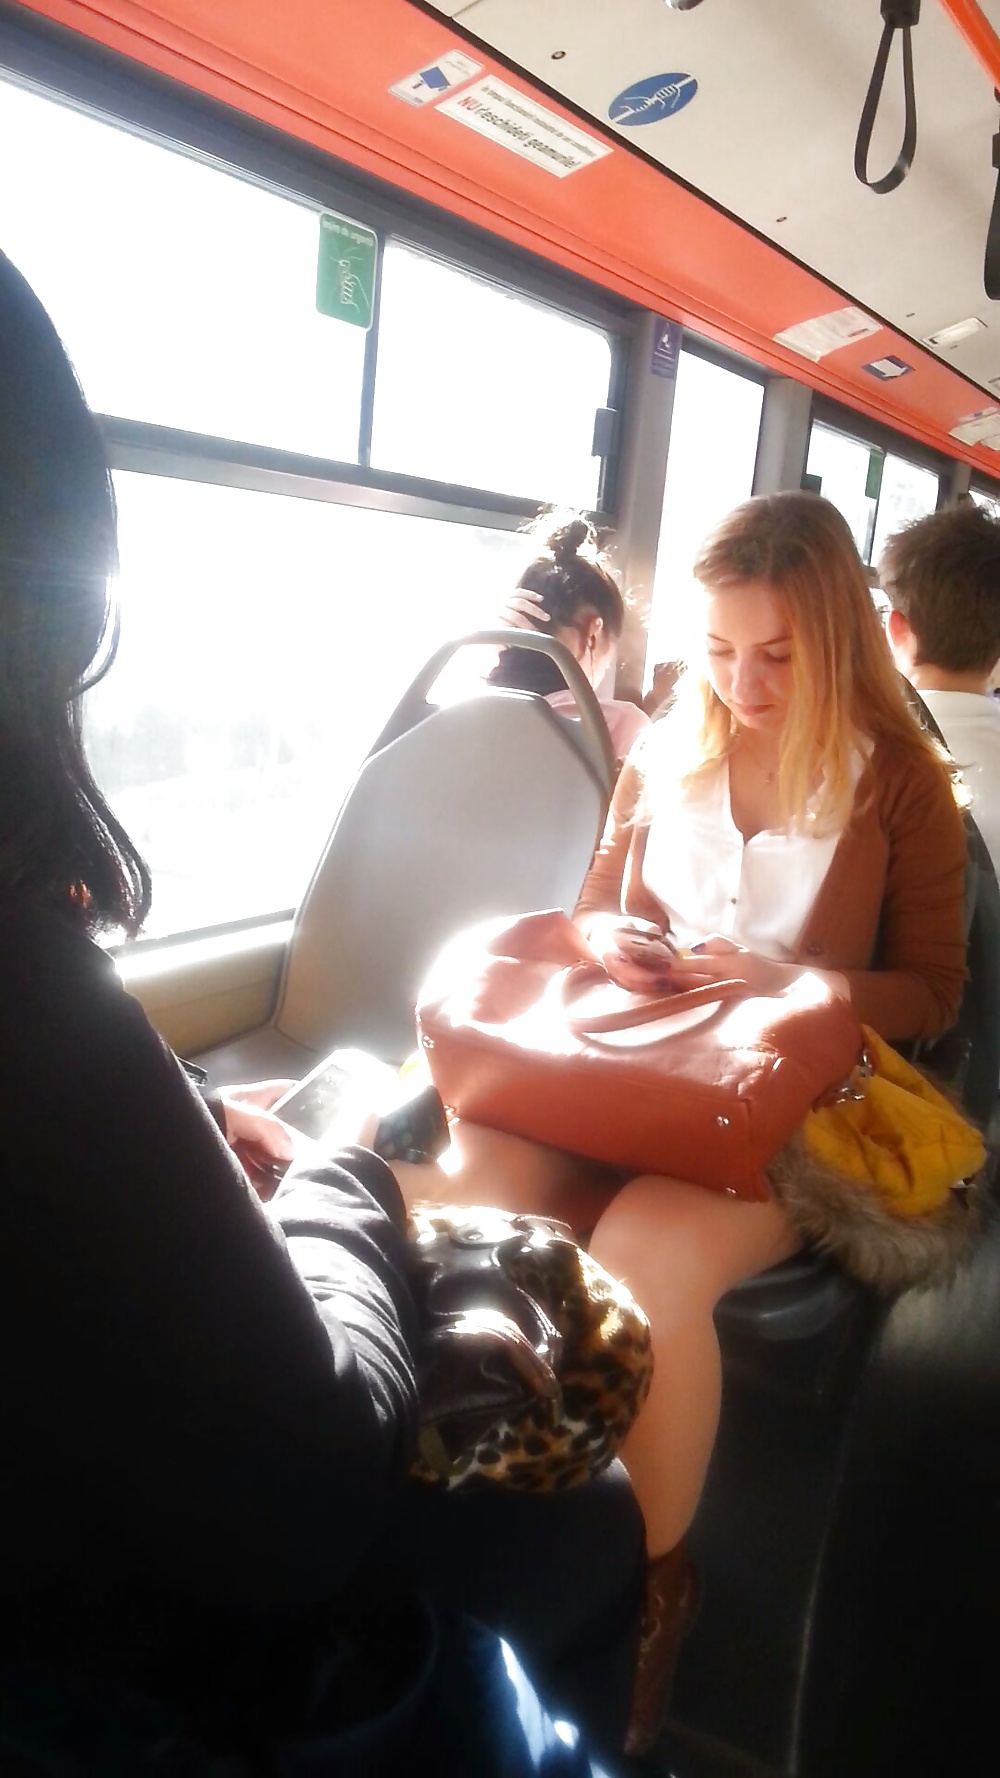 Spy sexy teens in bus and street romanian #31039888